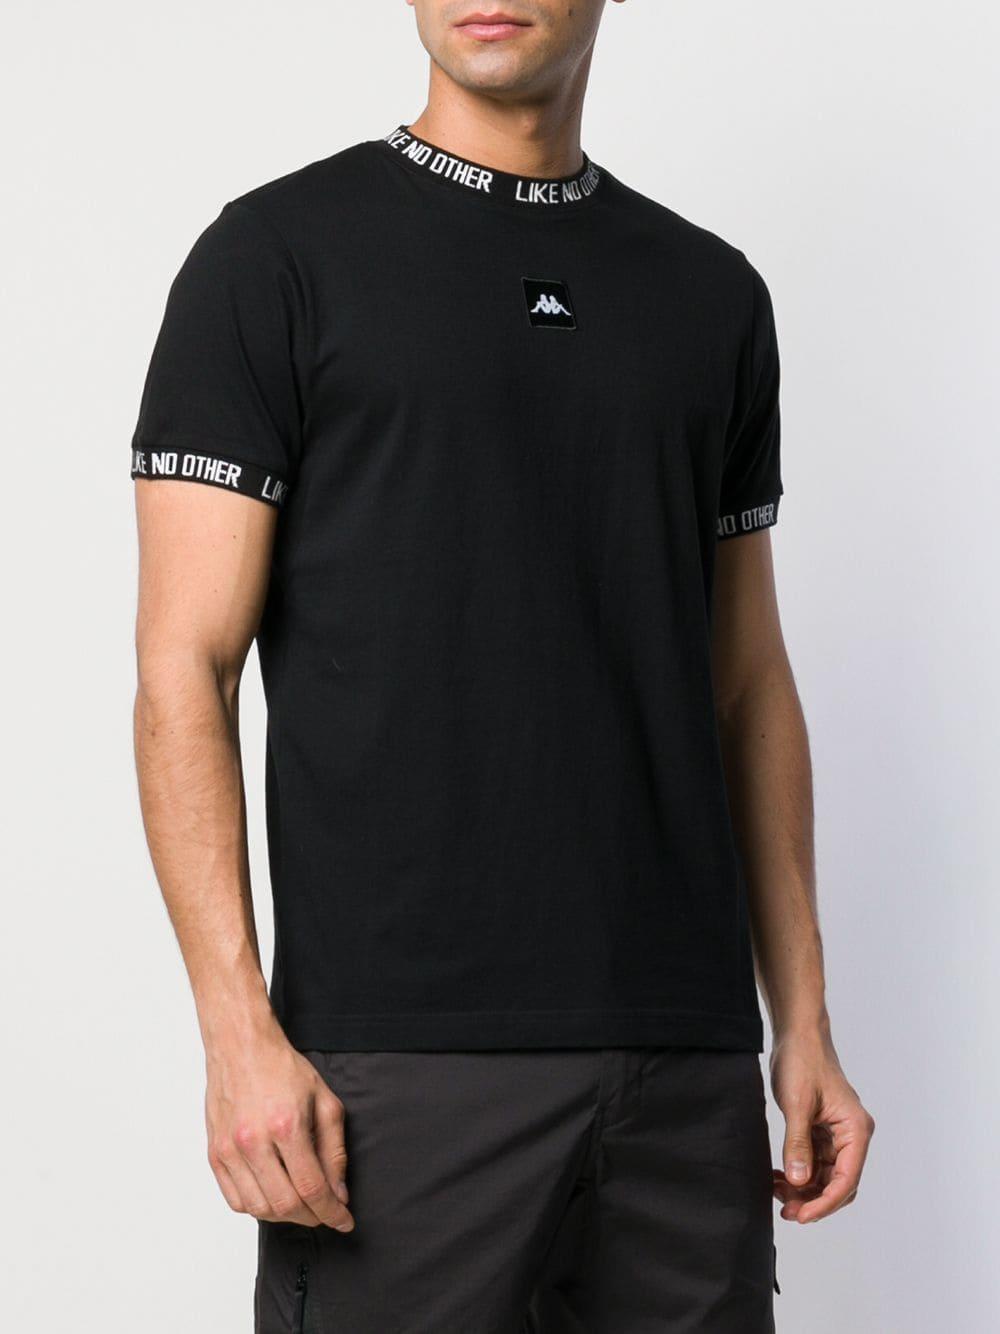 Kappa Like No Other T-shirt in Black for Men | Lyst